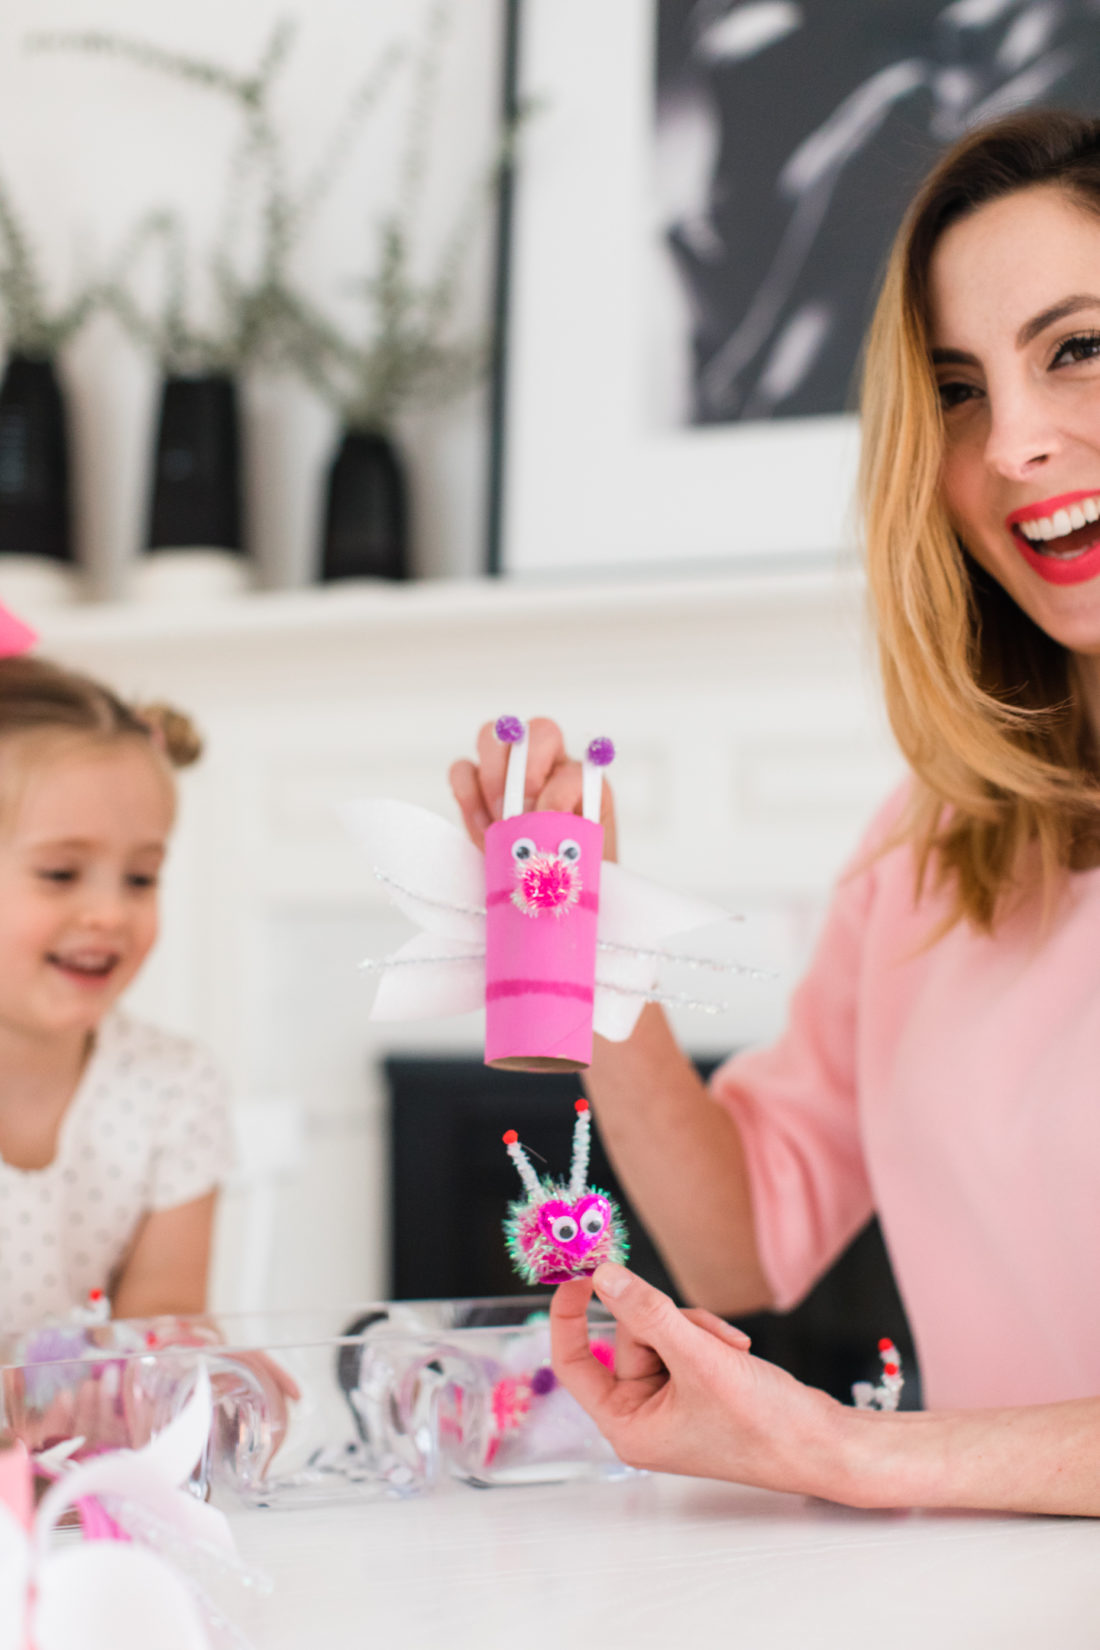 Eva Amurri Martino shows how the baby Lovebugs fit inside the Mommy Lovebugs as part of her Valentine's Day kids craft